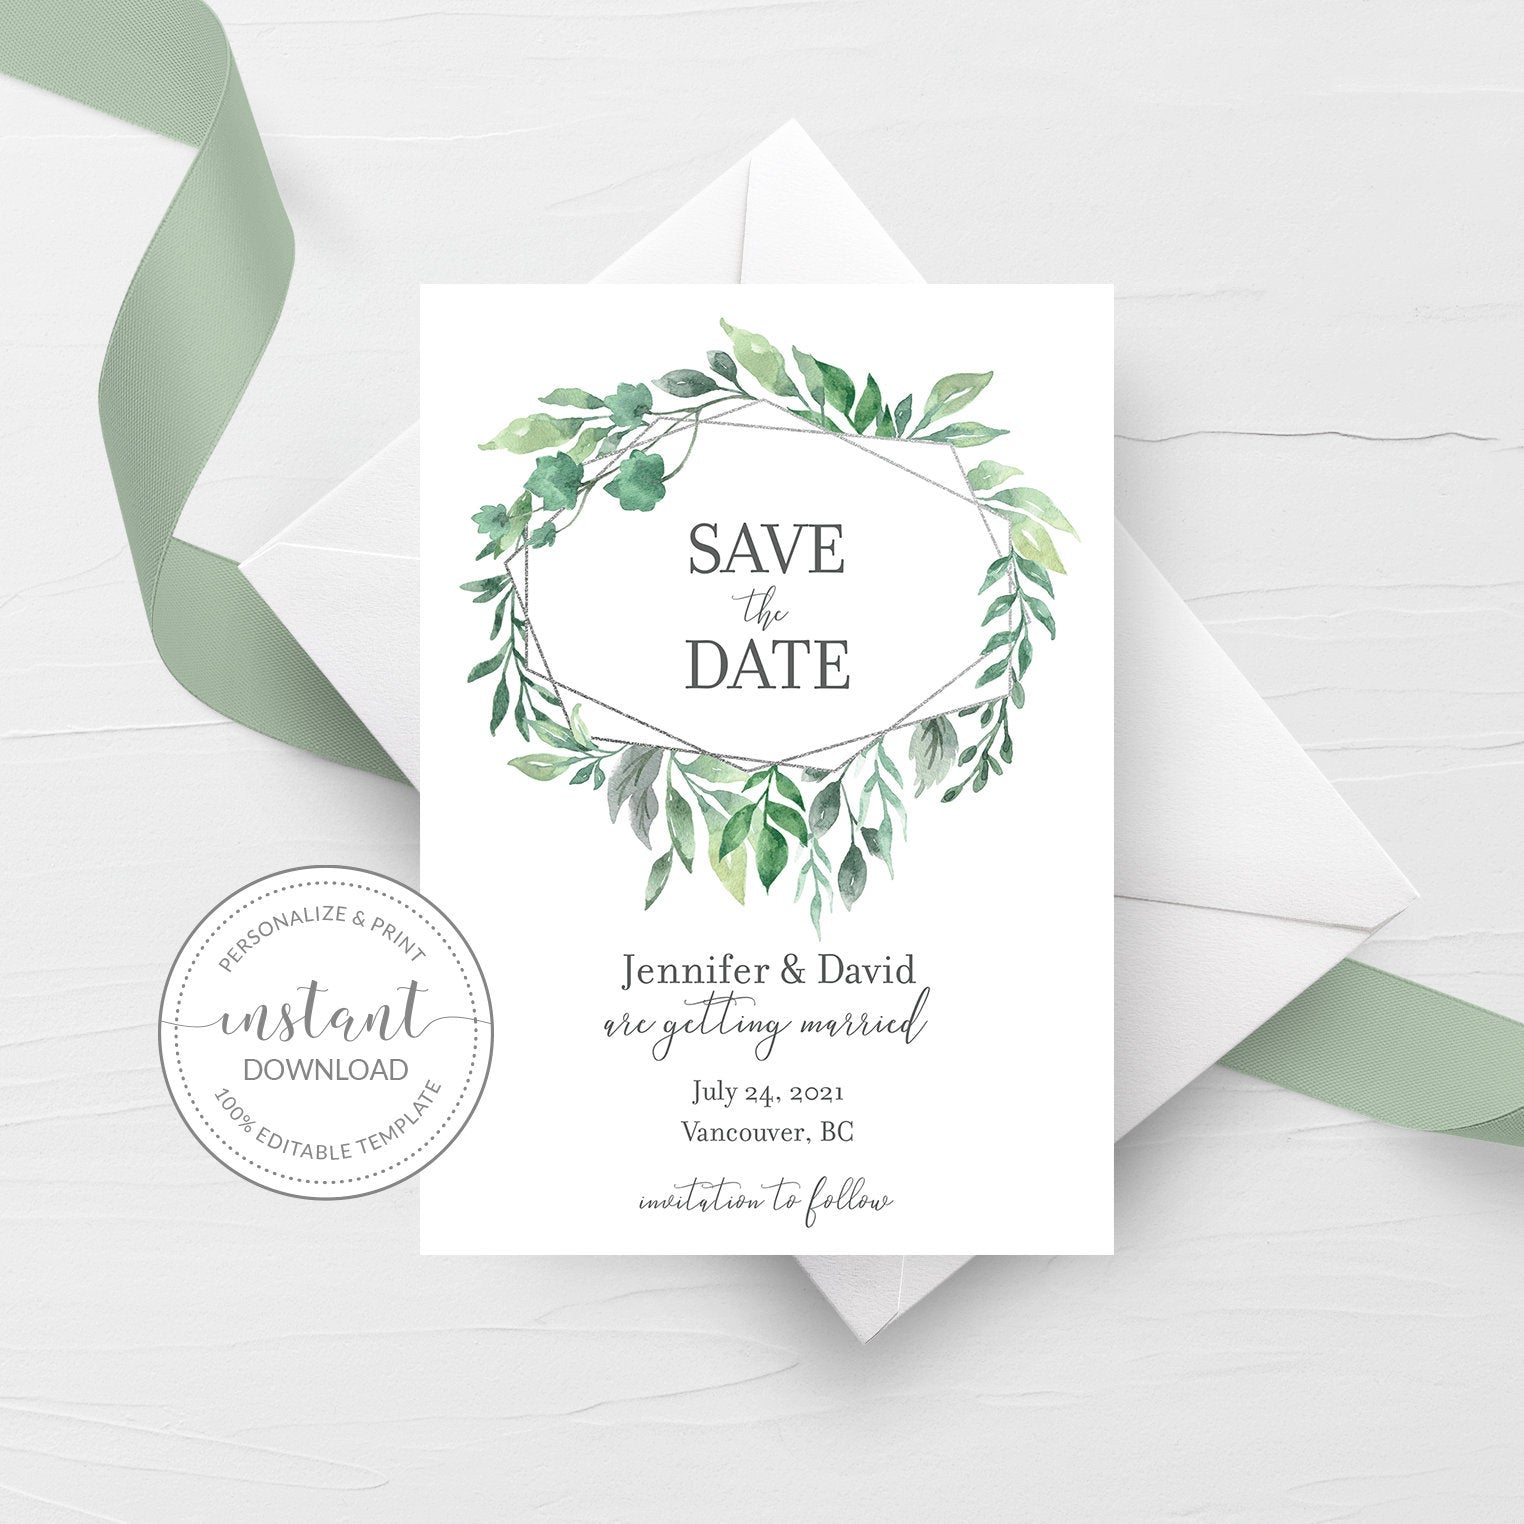 Geometric Silver Greenery Save The Date Card Template, Printable Wedding Announcement, Editable INSTANT DOWNLOAD - GFS100